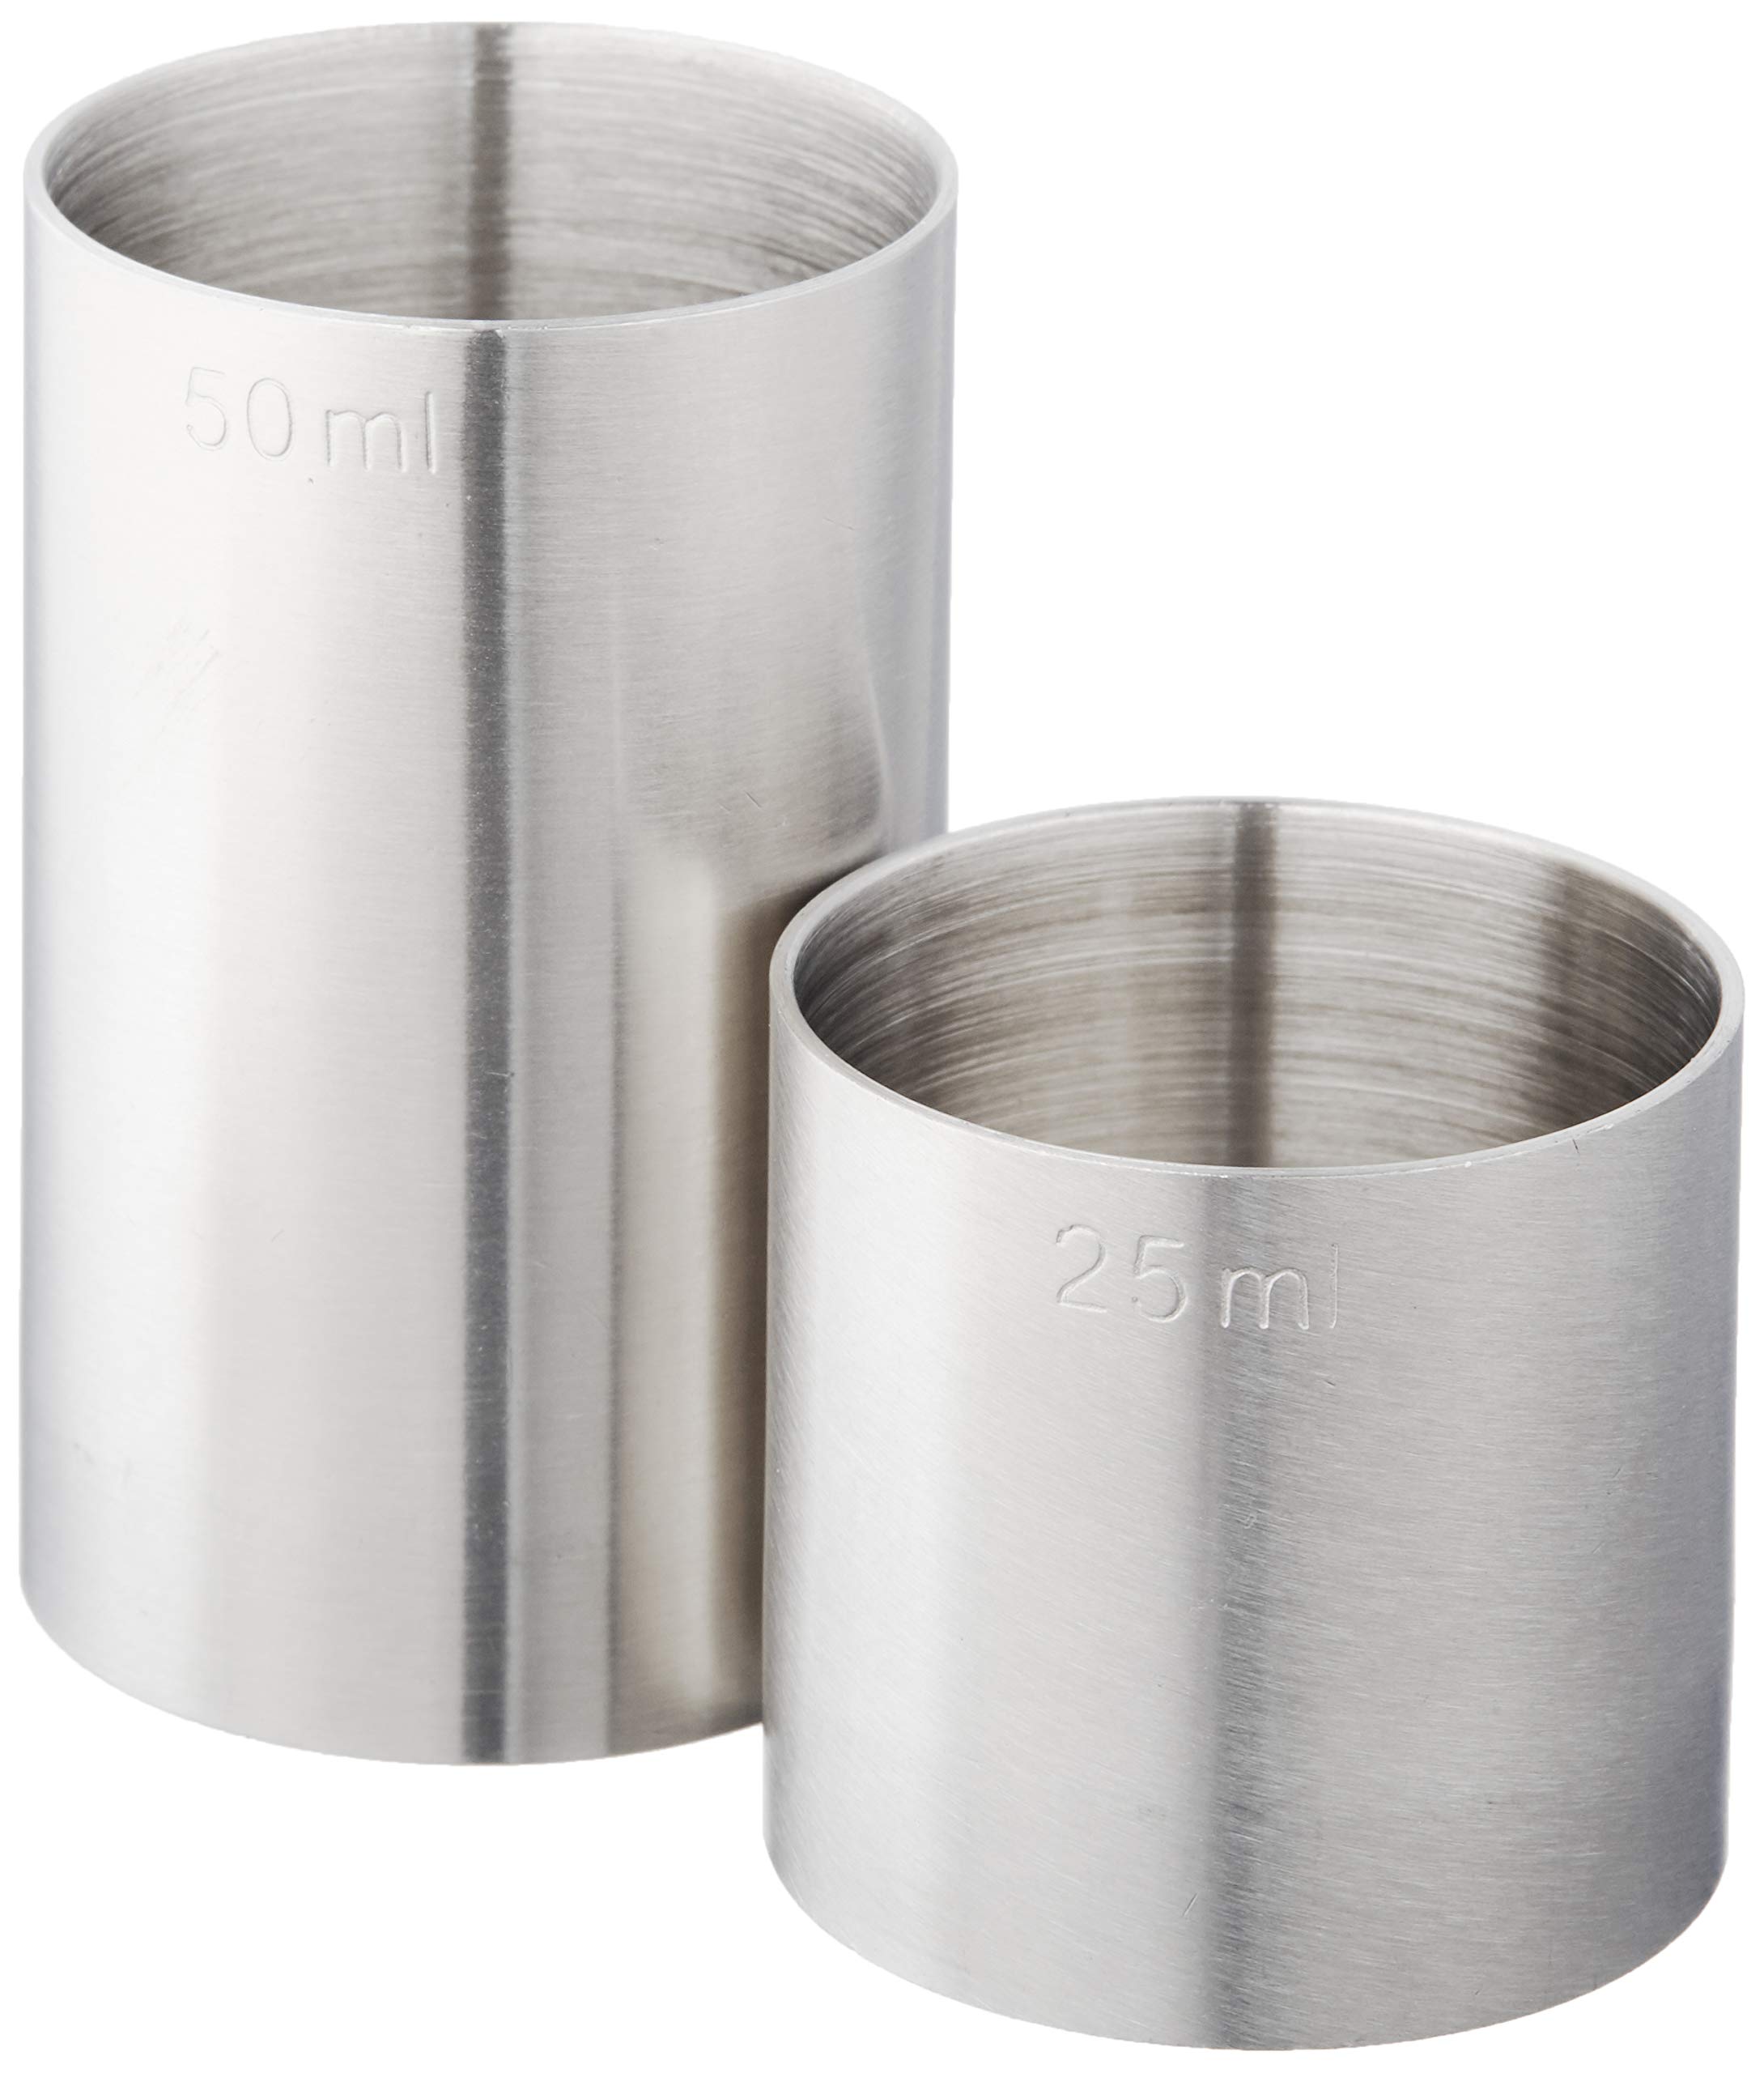 Barfly Thimble Measure, Set, 25/50 ml., Stainless Steel